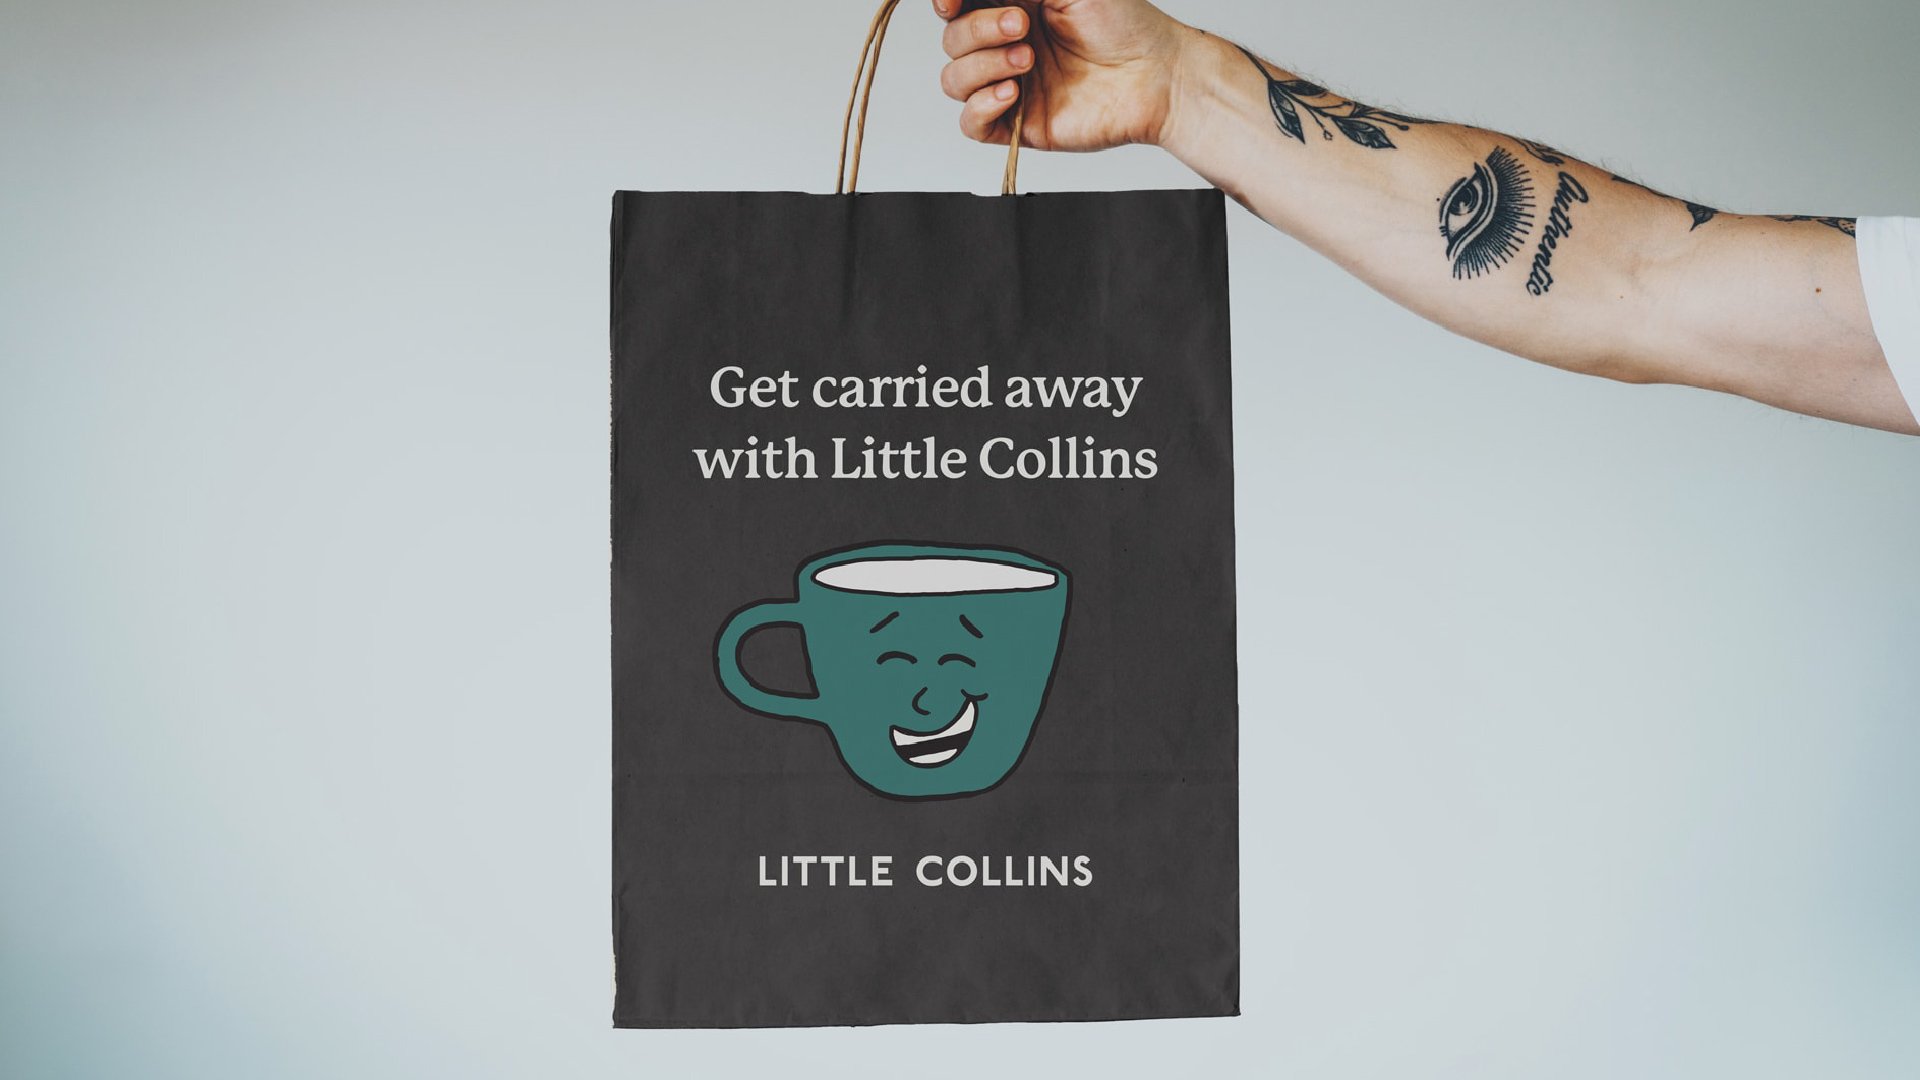 A tattooed arm holds a Little Collins bag. The text says, “Get carried away with Little Collins,” and features a mug illustration with a laughing face.